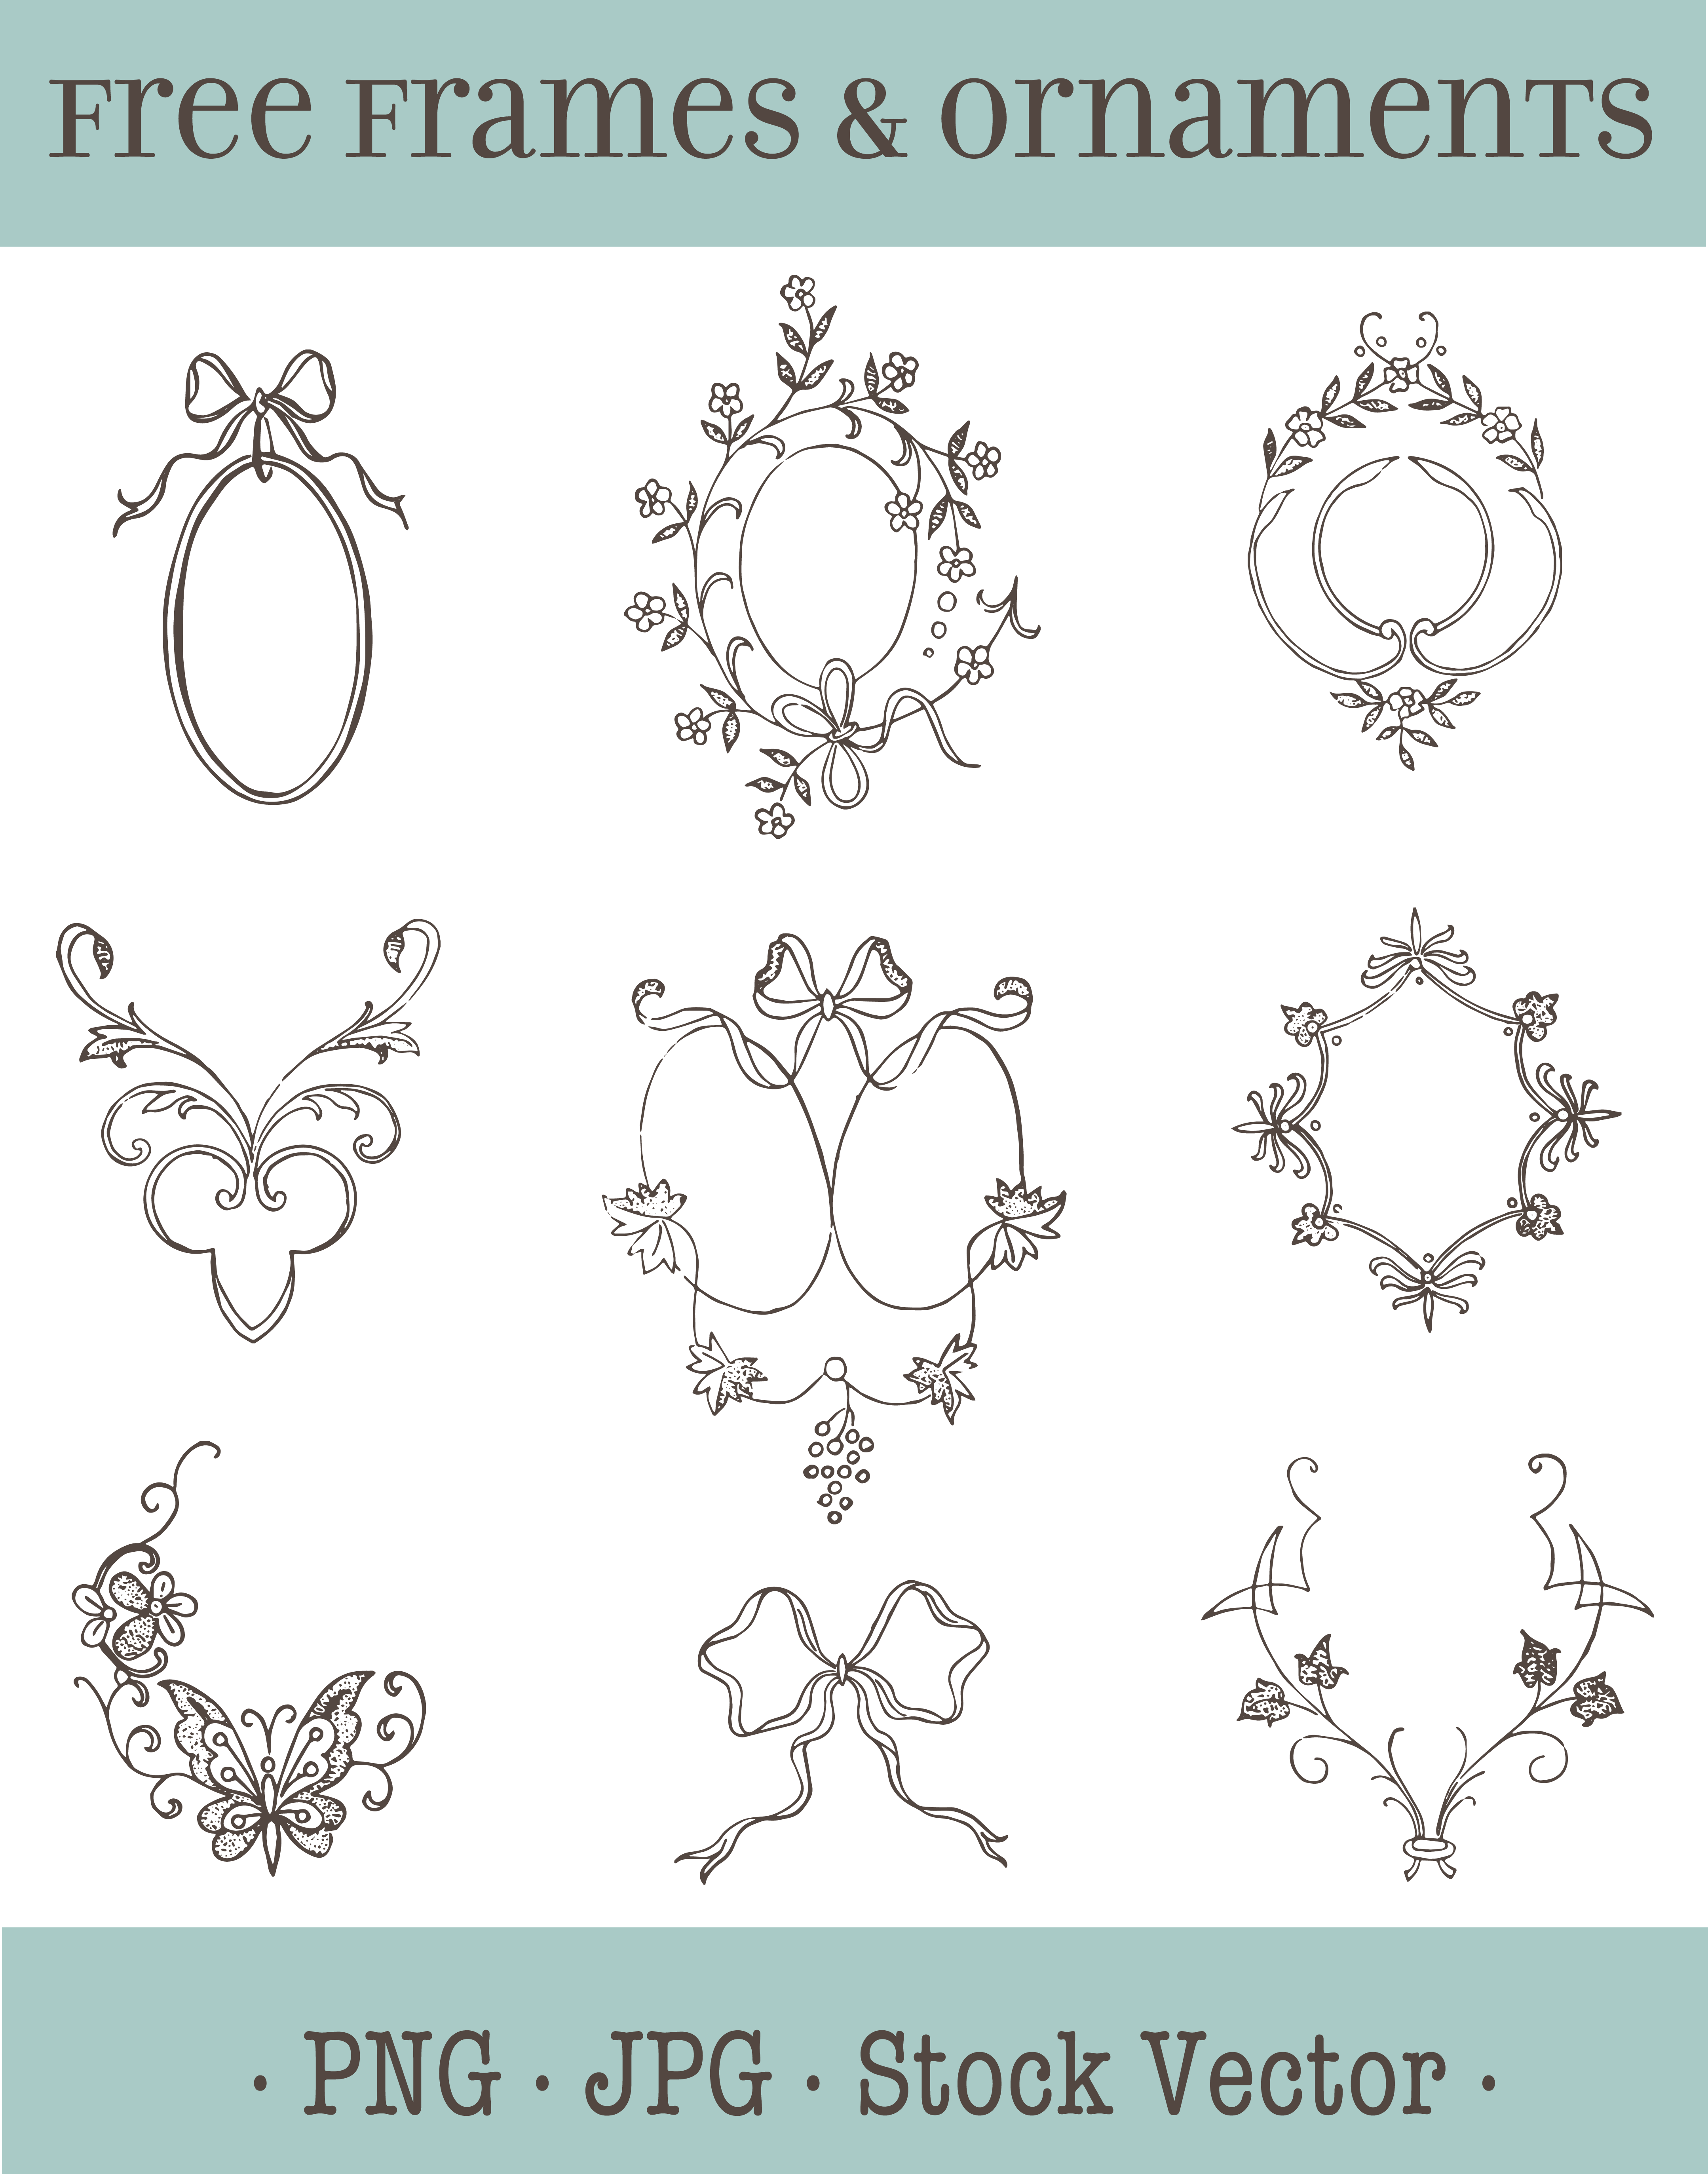 Invitation clipart embellishment. Png http vintagegraphics ohsonifty